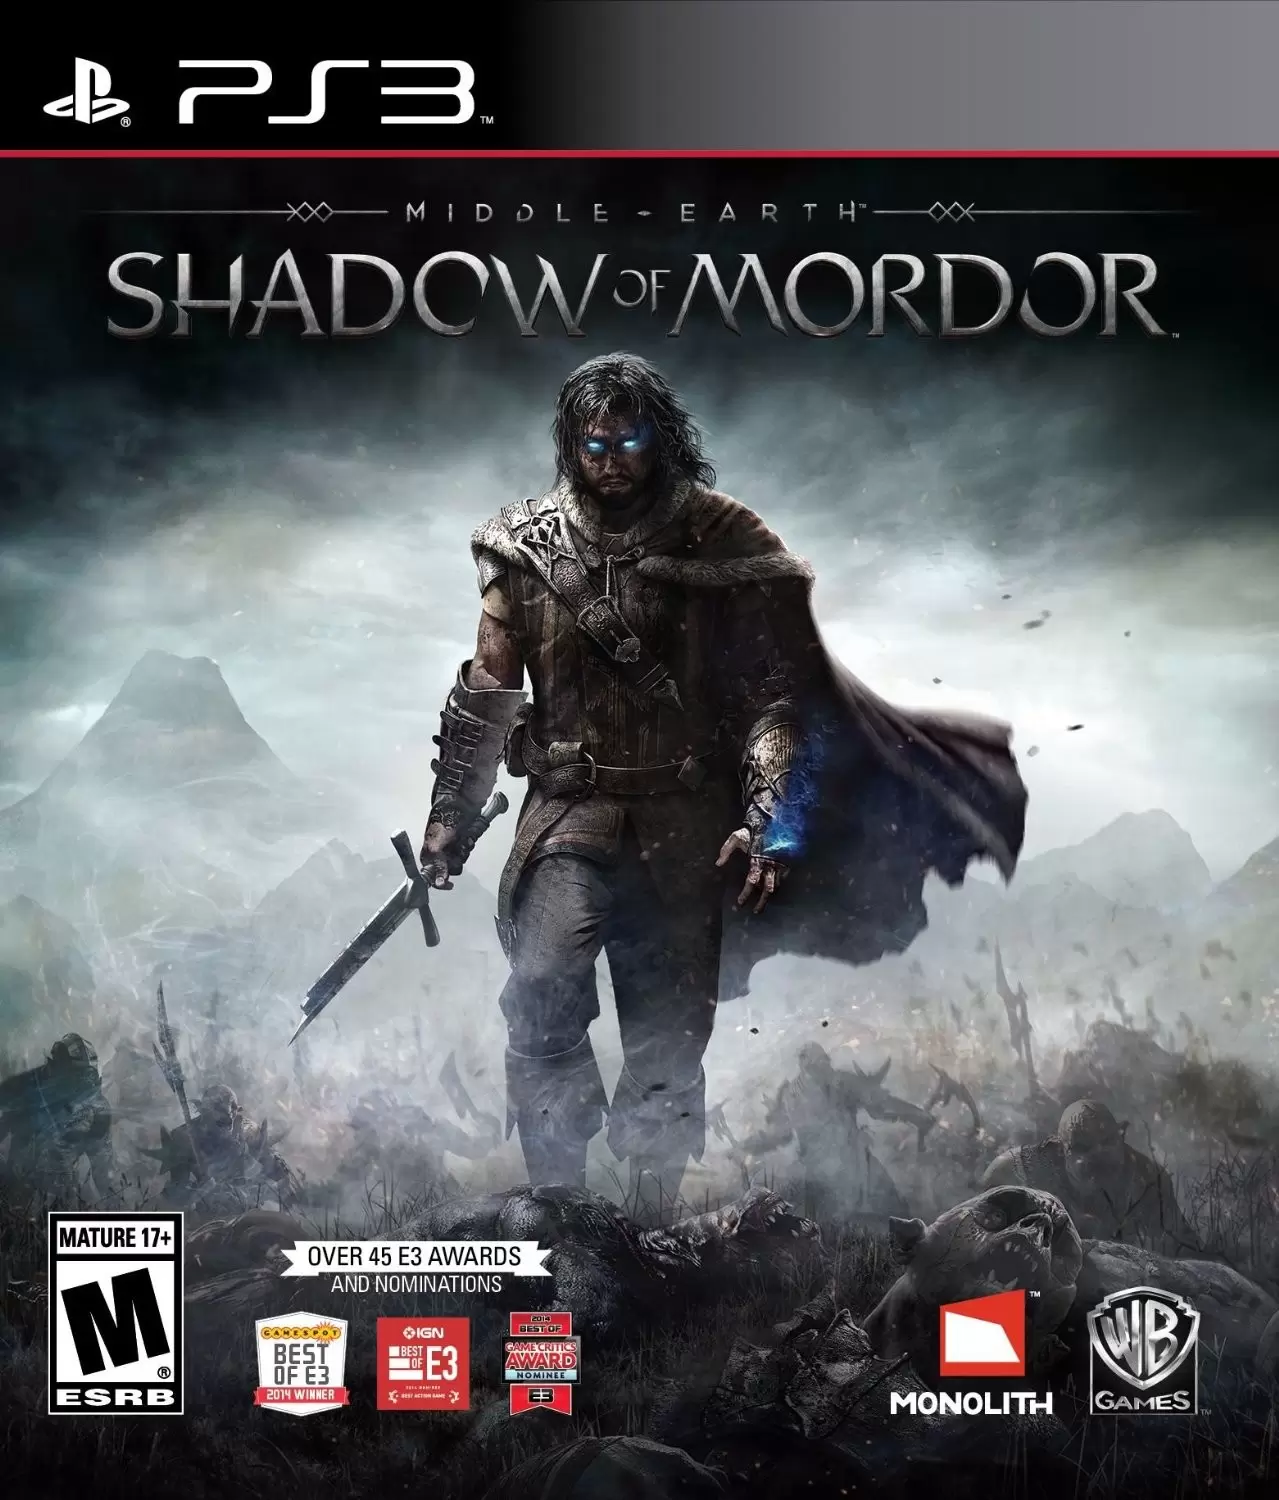 PS3 Games - Middle-Earth: Shadow of Mordor